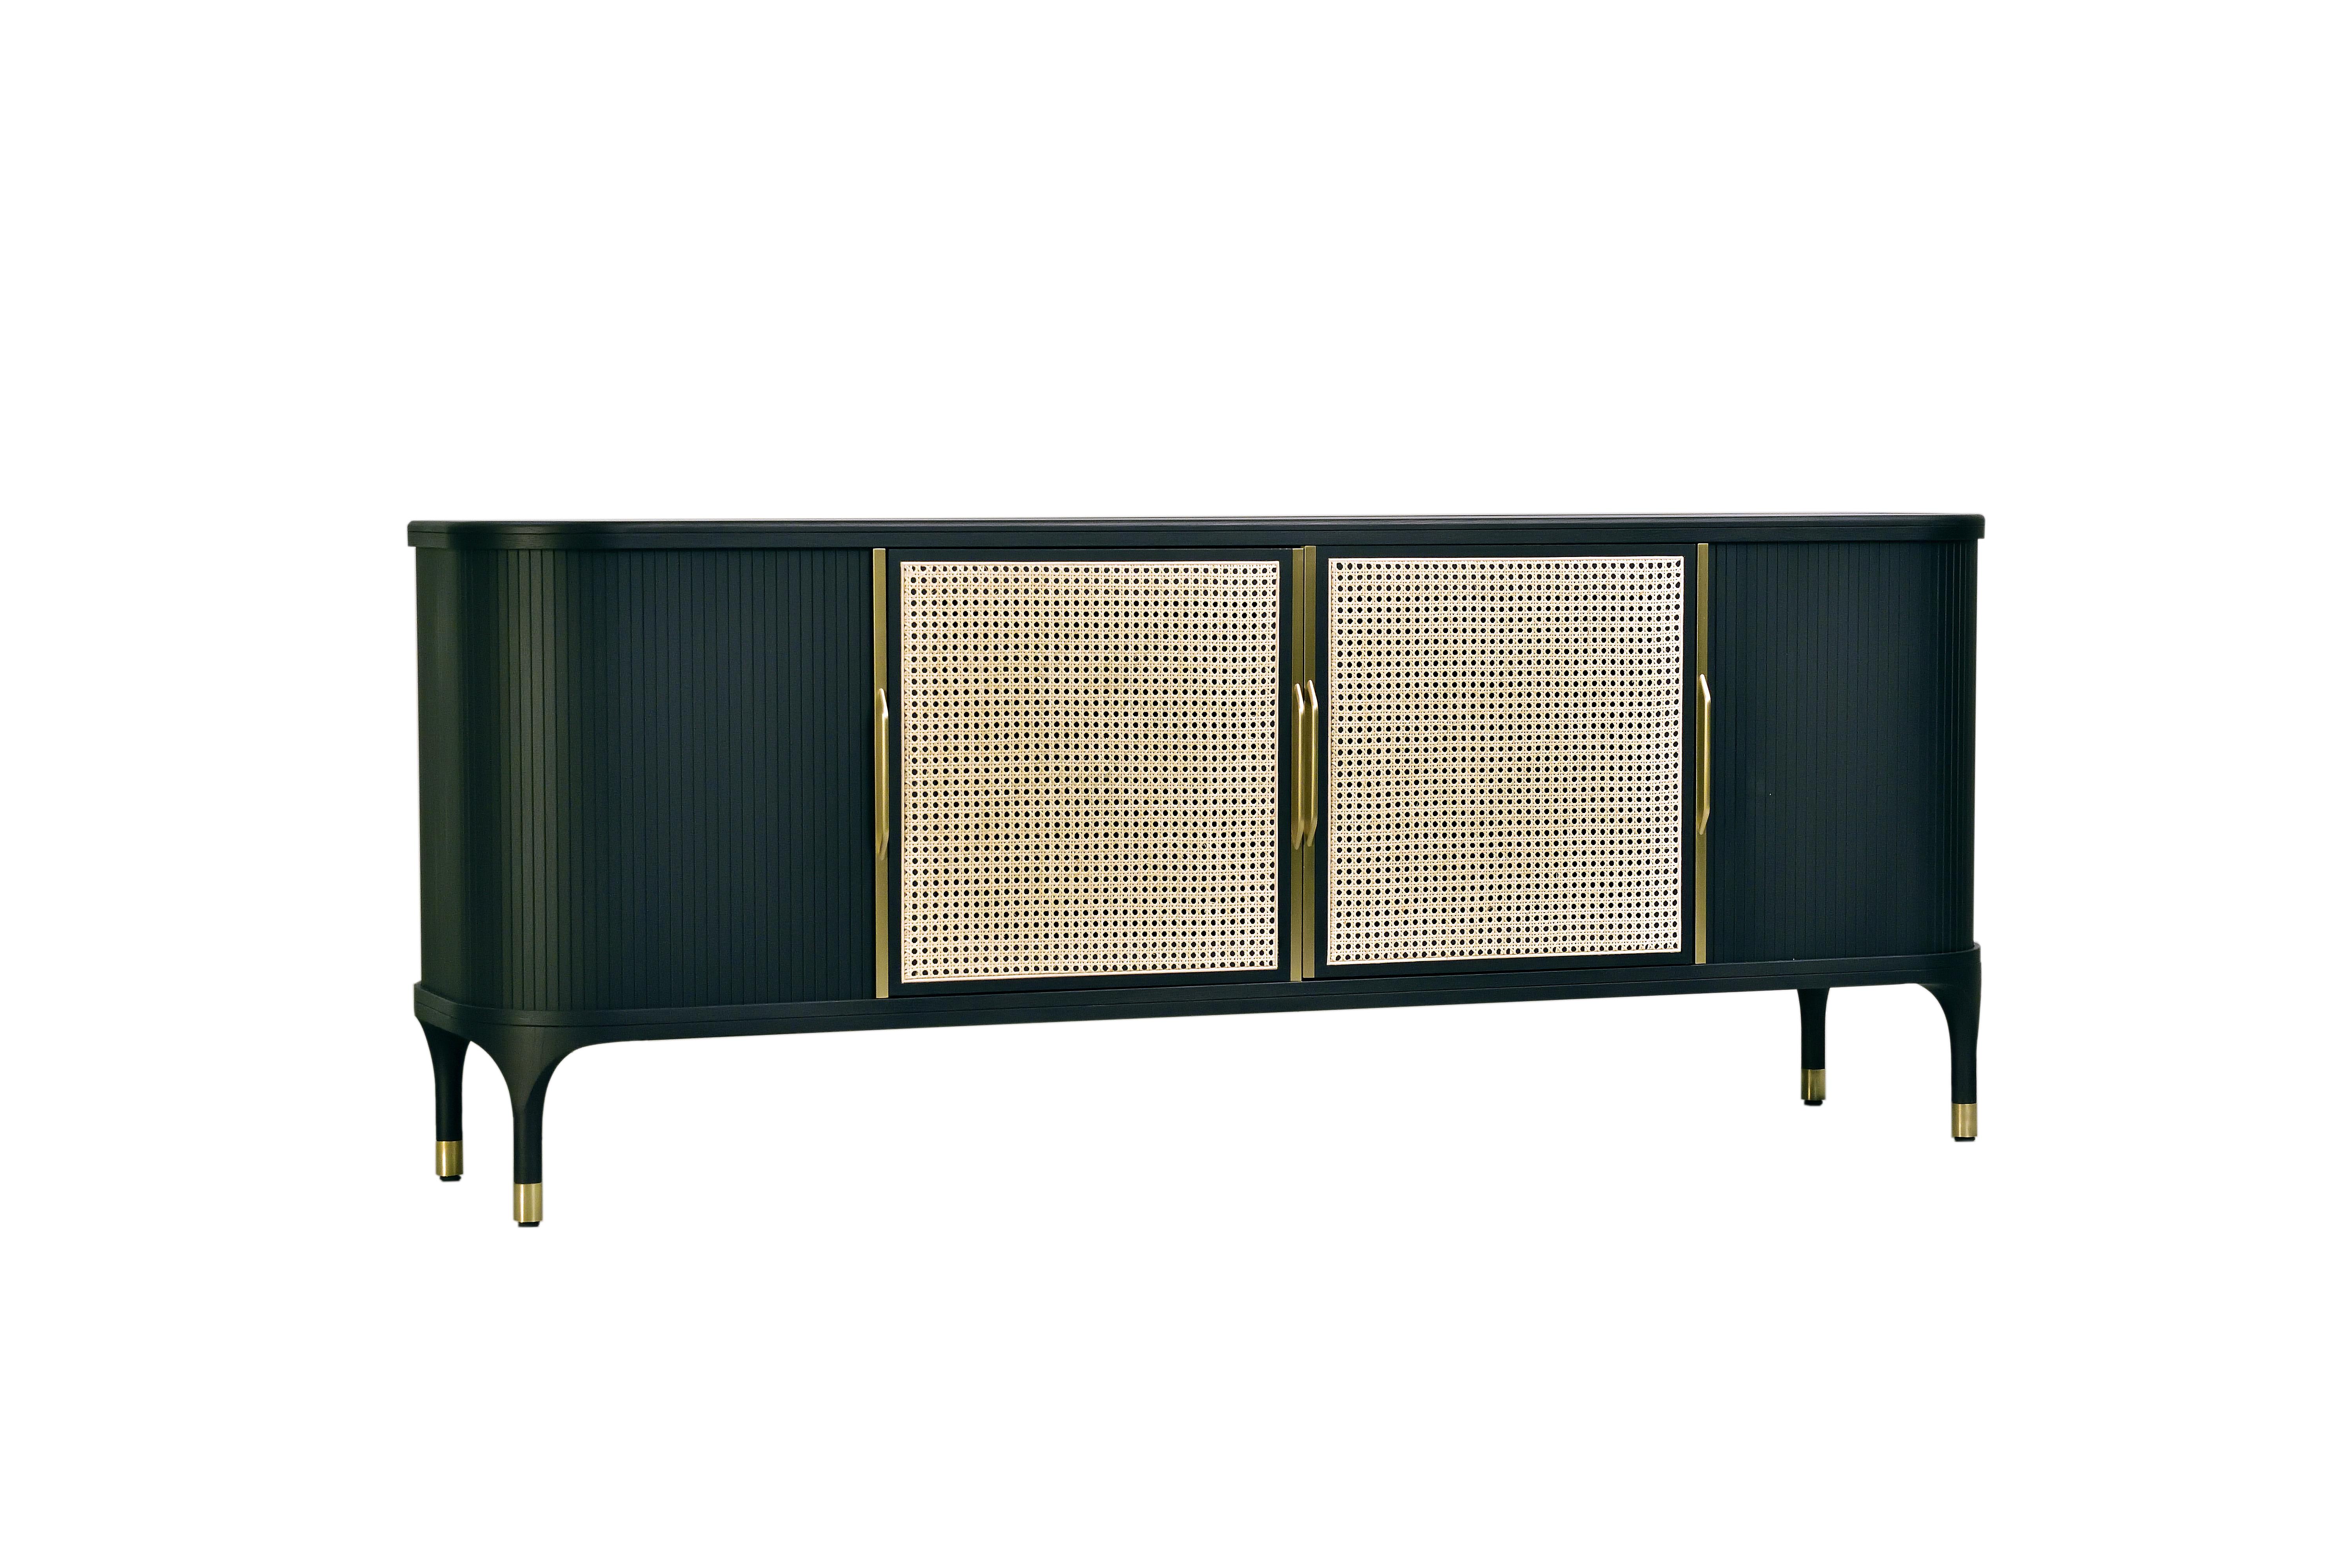 Contemporary style Joyce sideboard made of ashwood
Two central doors with Vienna straw and two side sliding doors with handmade brass handles.
The top can be made of wood, marble-ceramic or glass.
Designed by Libero Rutilo.
Made in Italy by